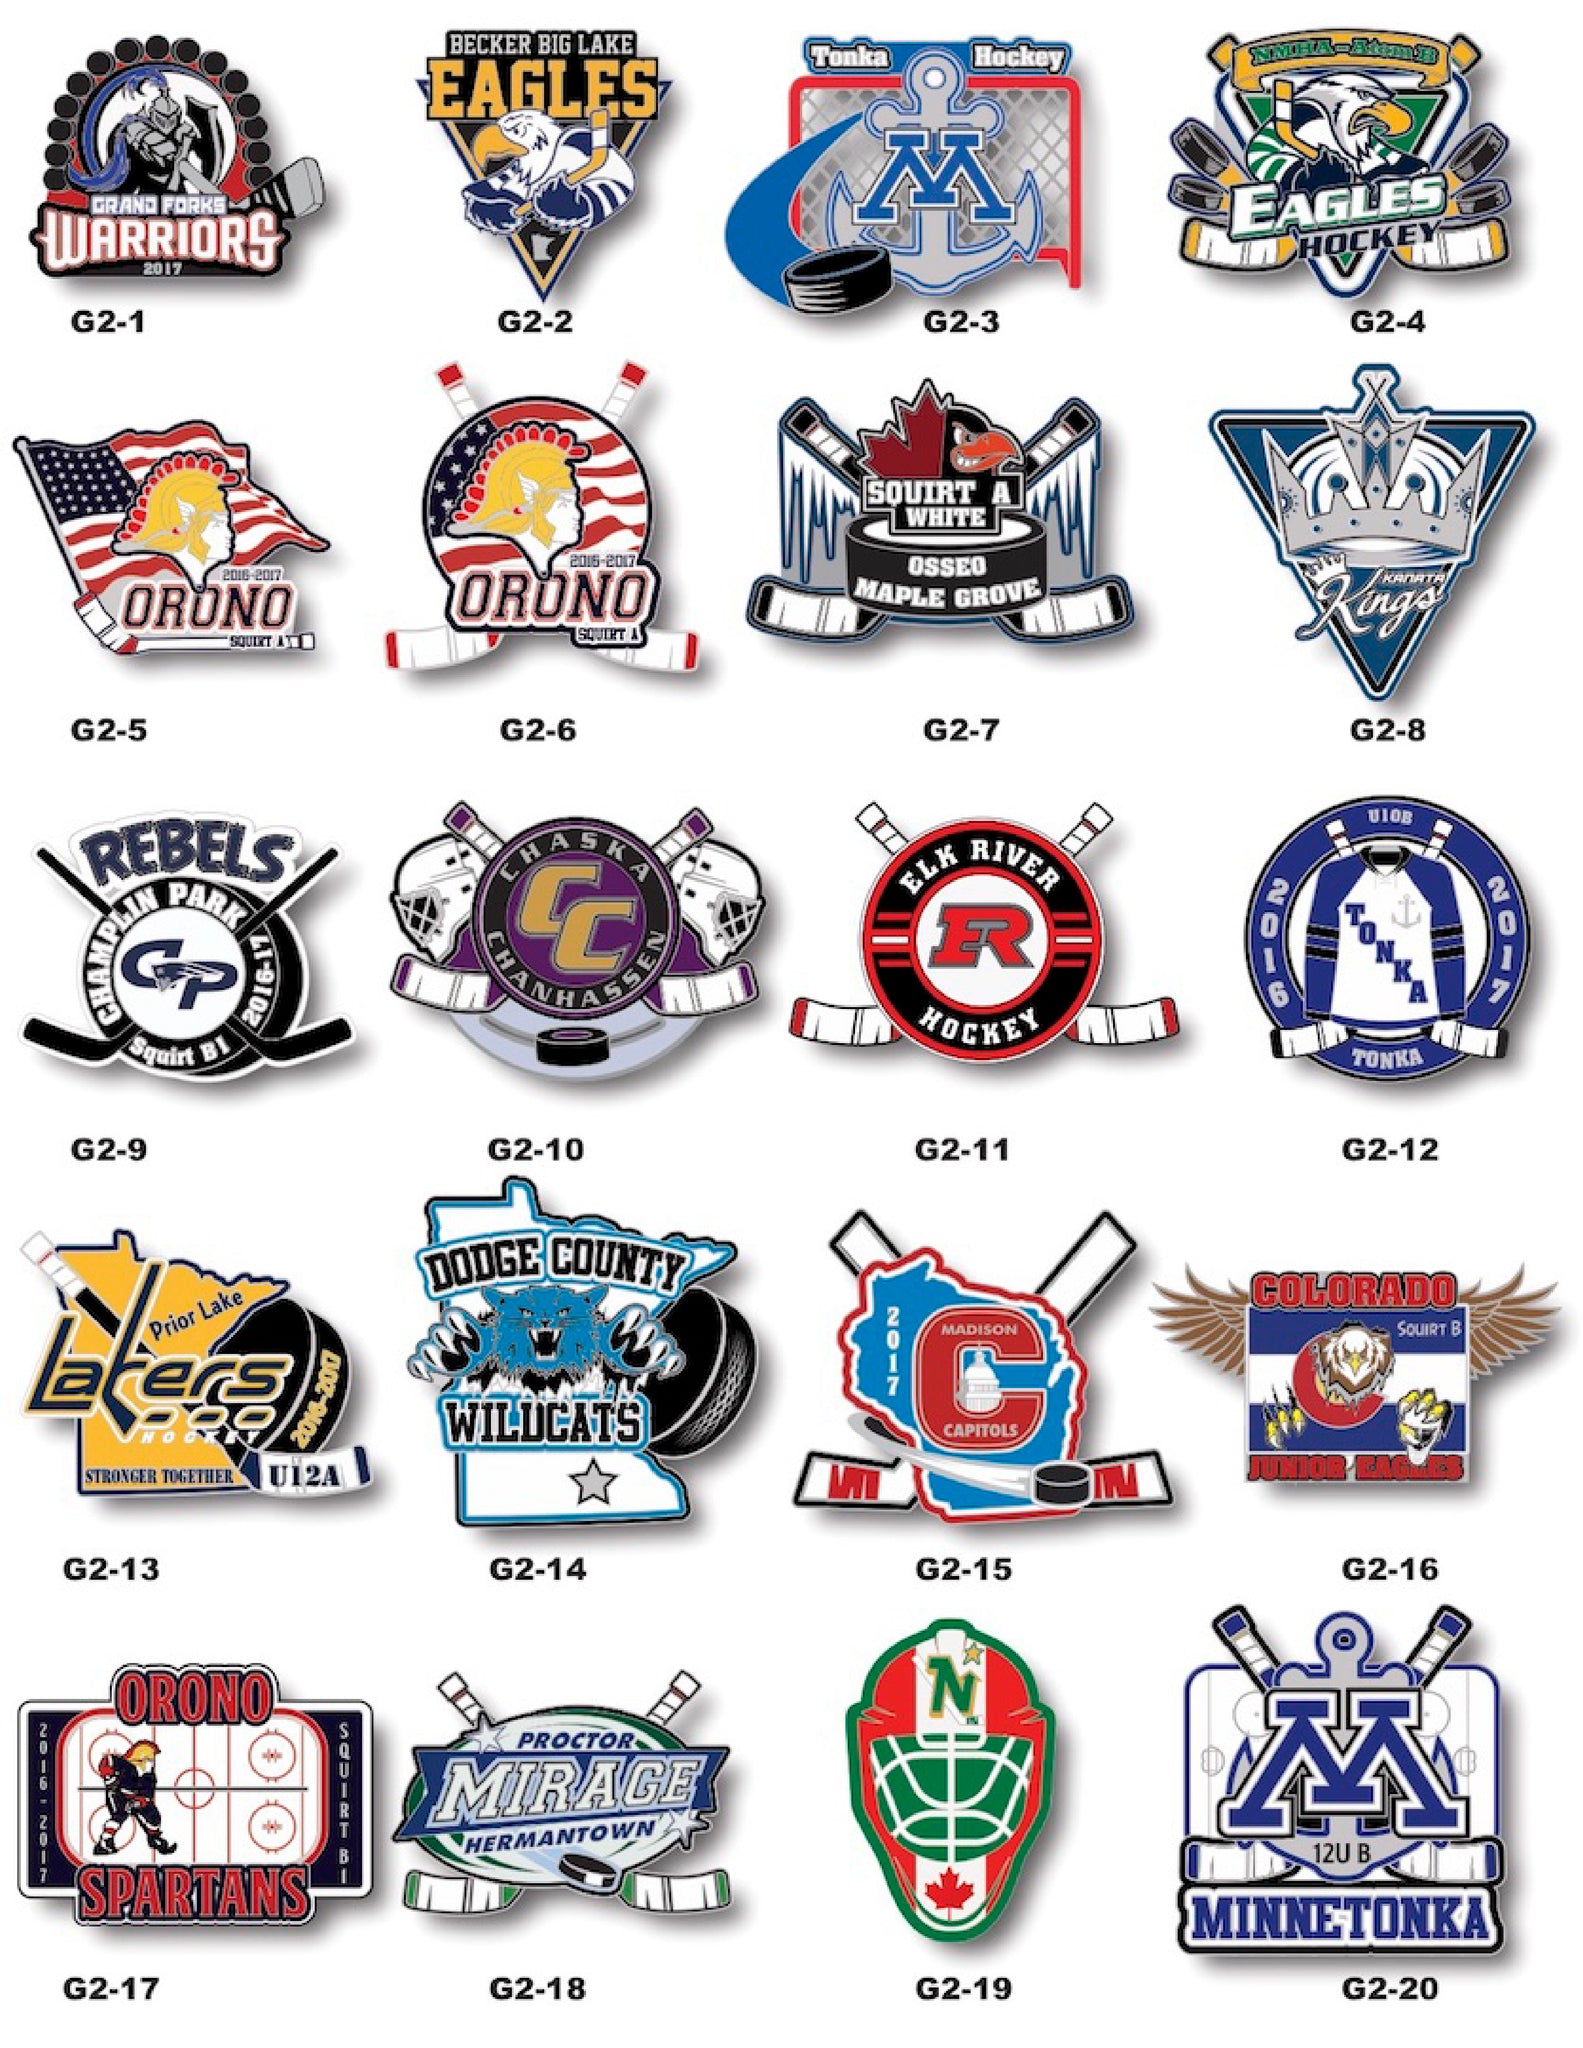 Hockey Trading Pin Gallery #2 - SteelBerry Pins